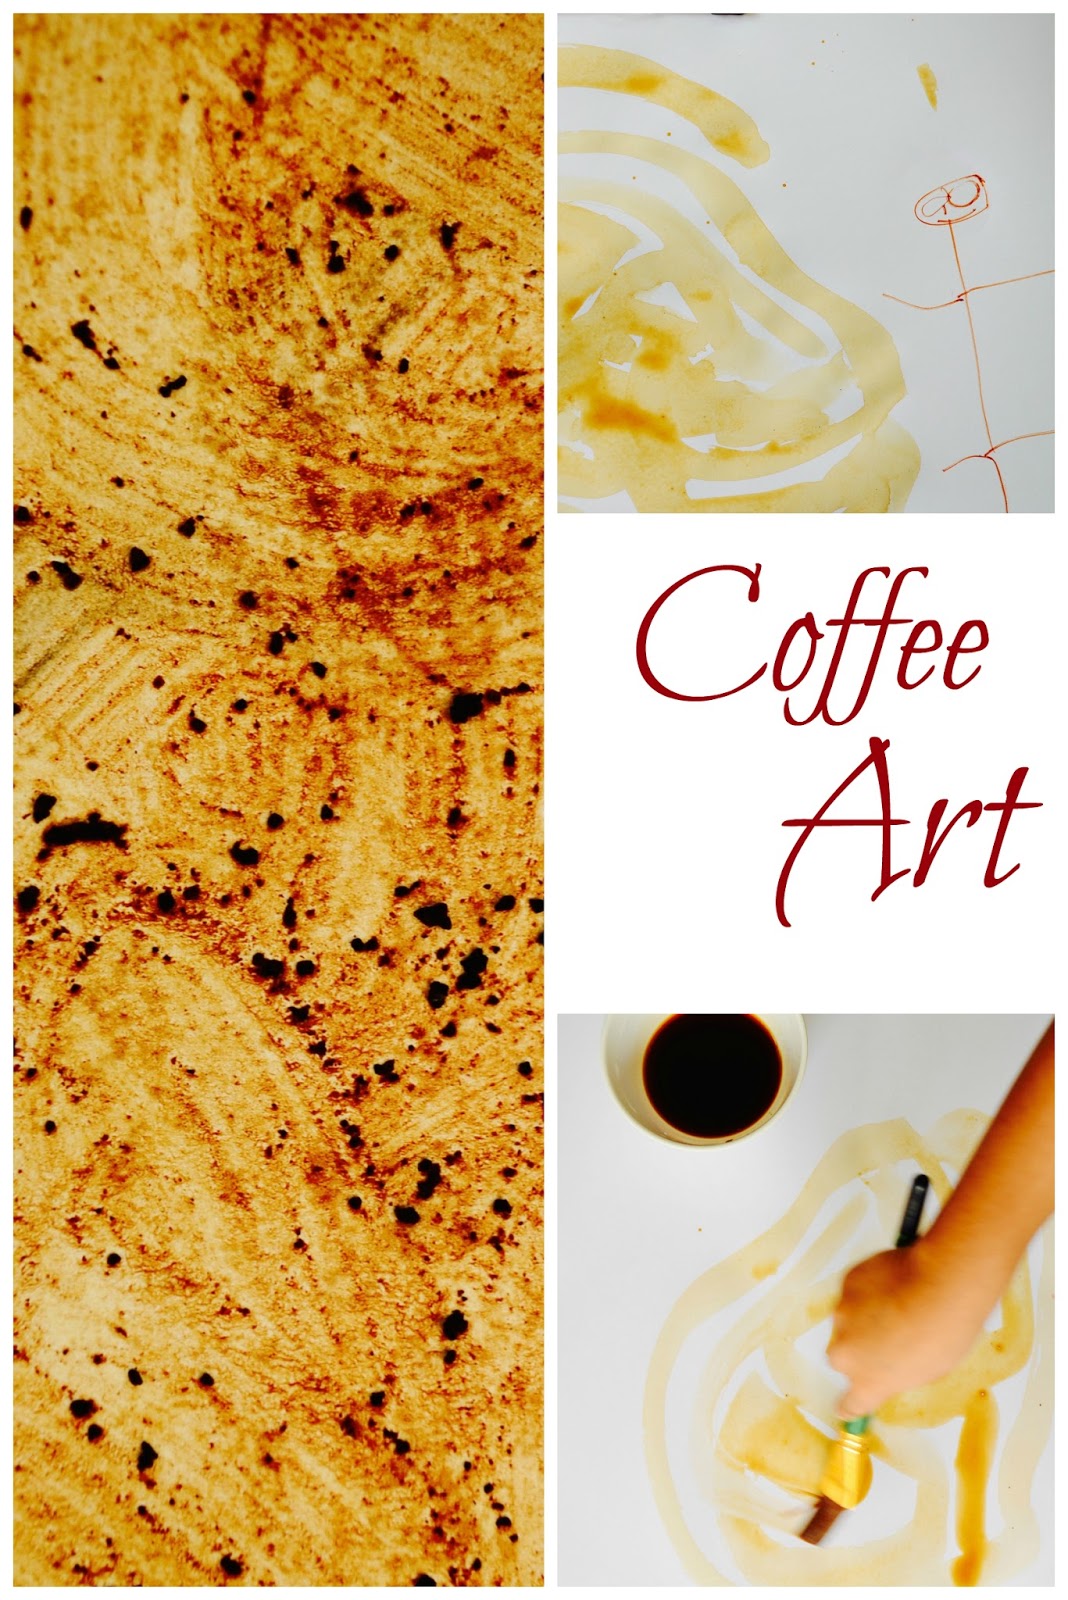 You can use so many everyday items to make art. Don't forget about coffee! It makes a gorgeous brown.